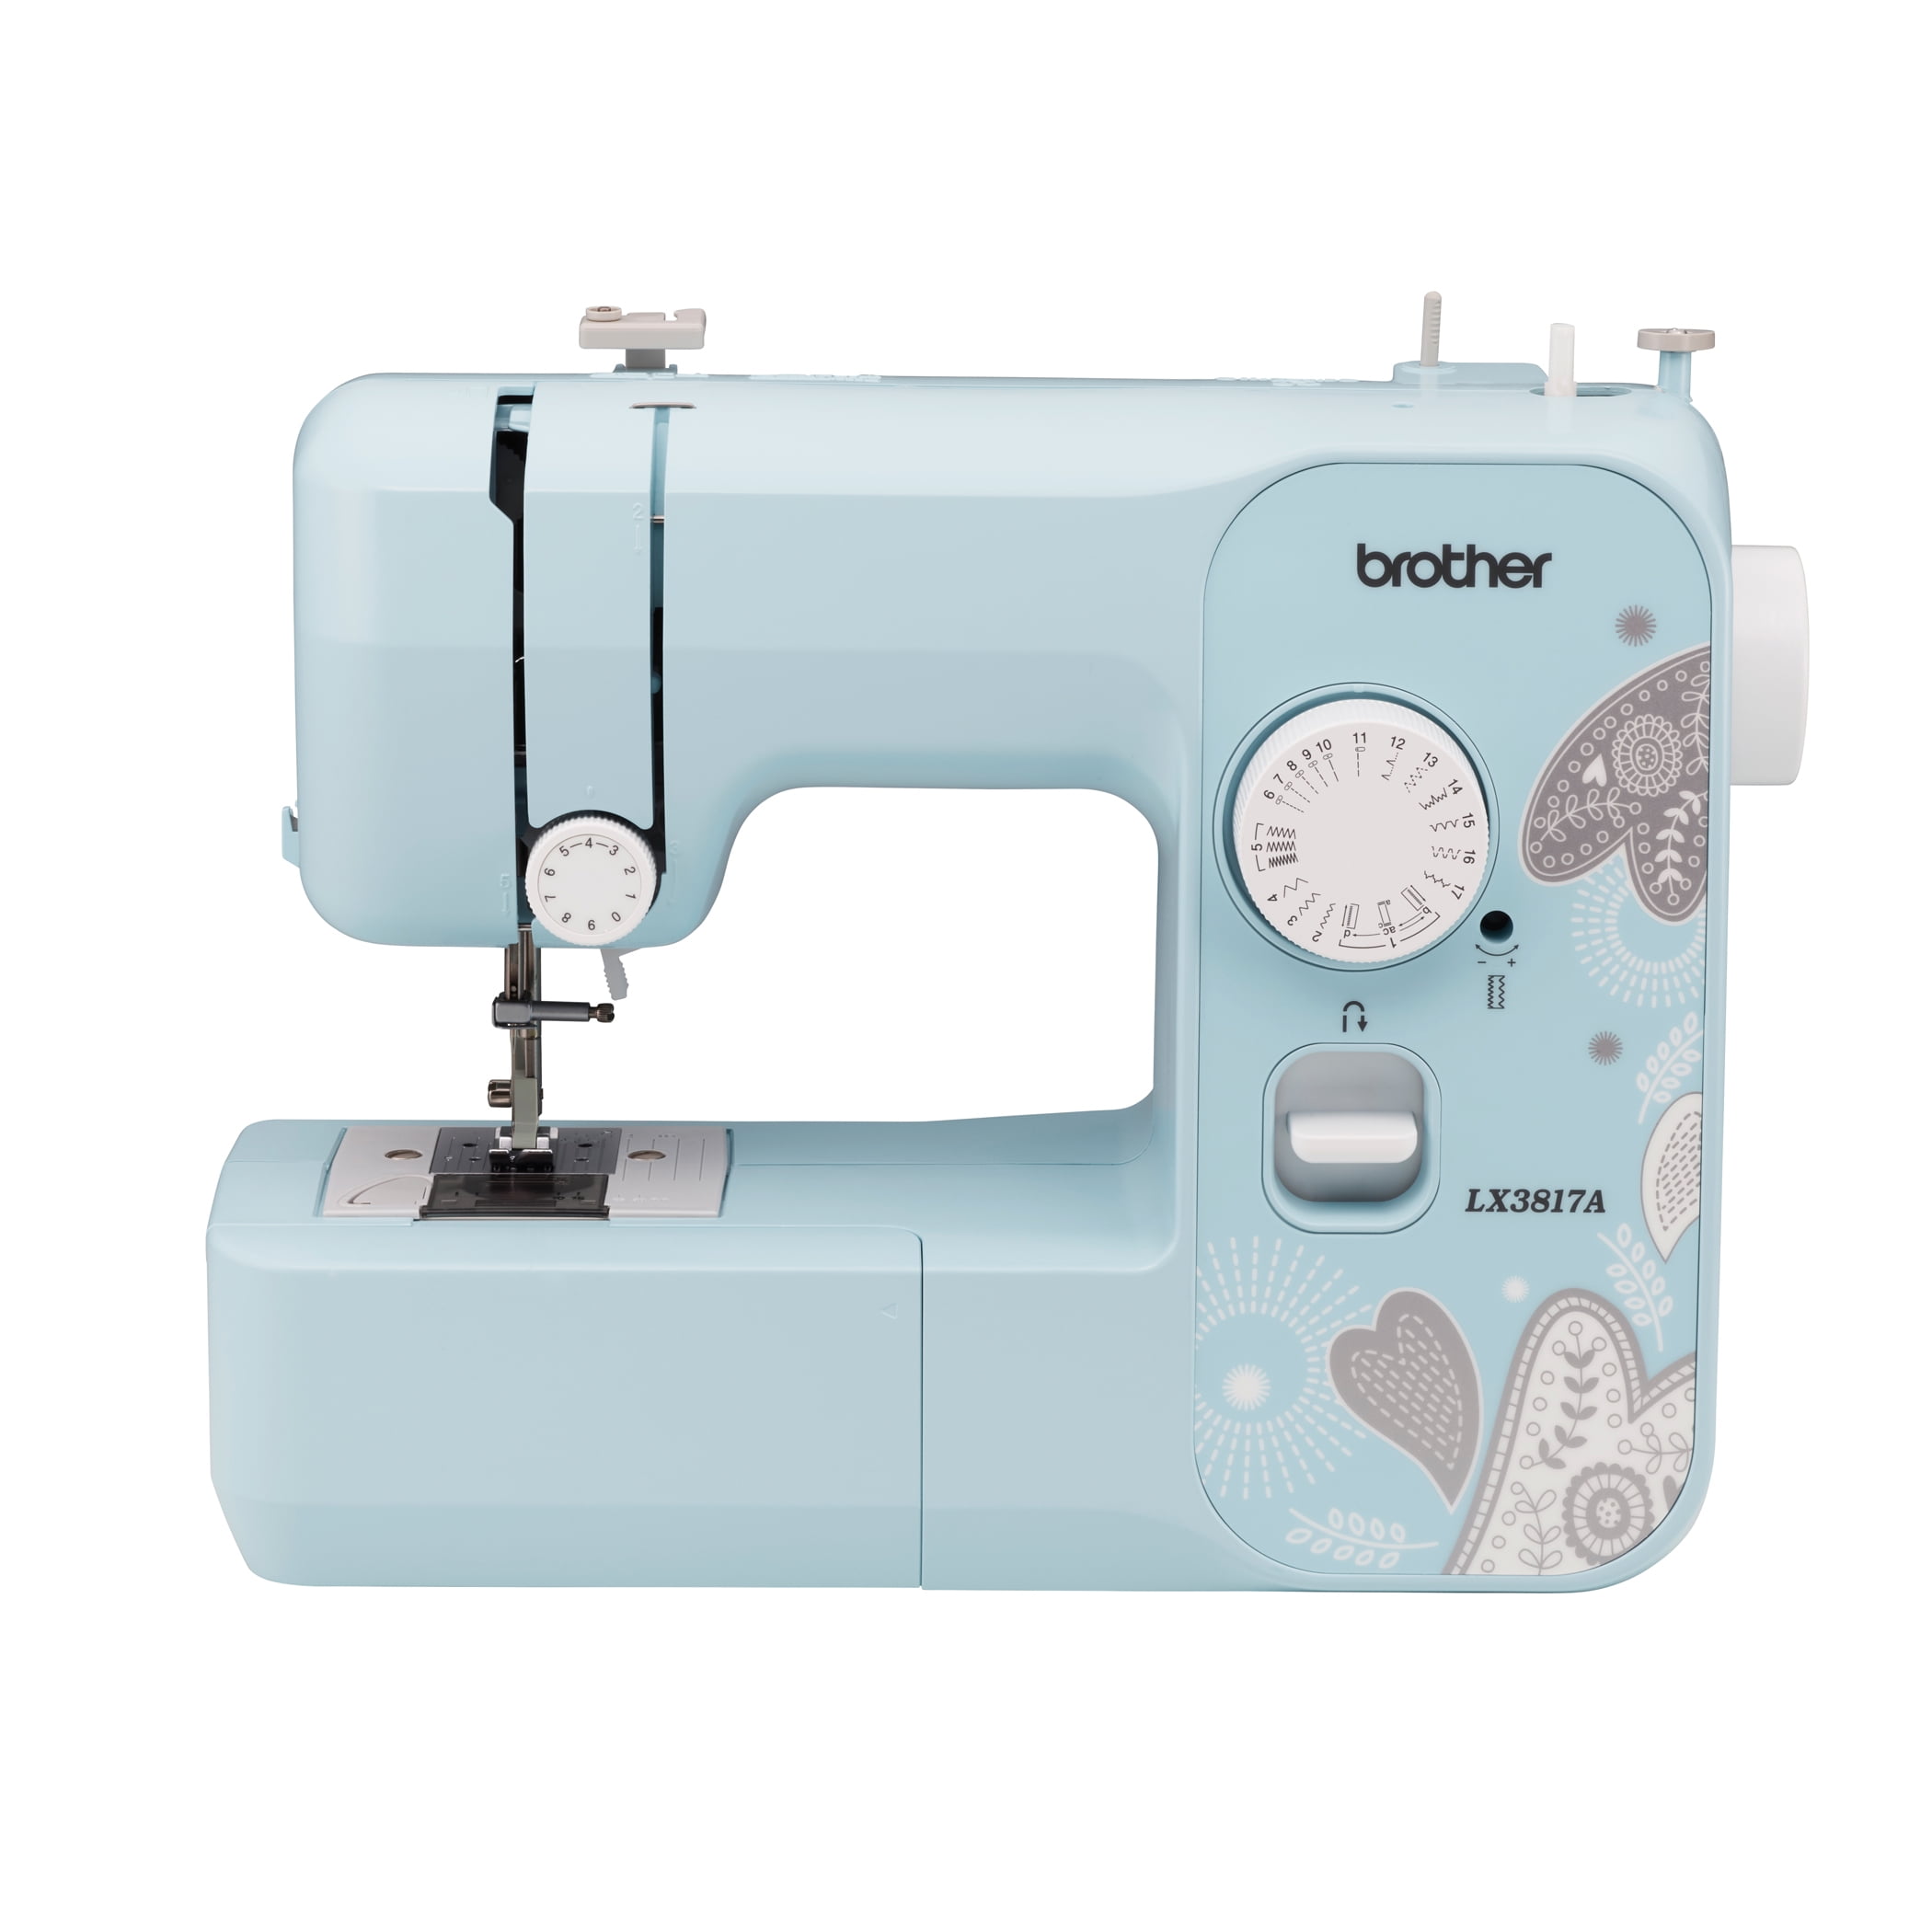 Portable Cordless Mending Machine with Sewing Kit & Storage Bag SINGER Stitch Quick 